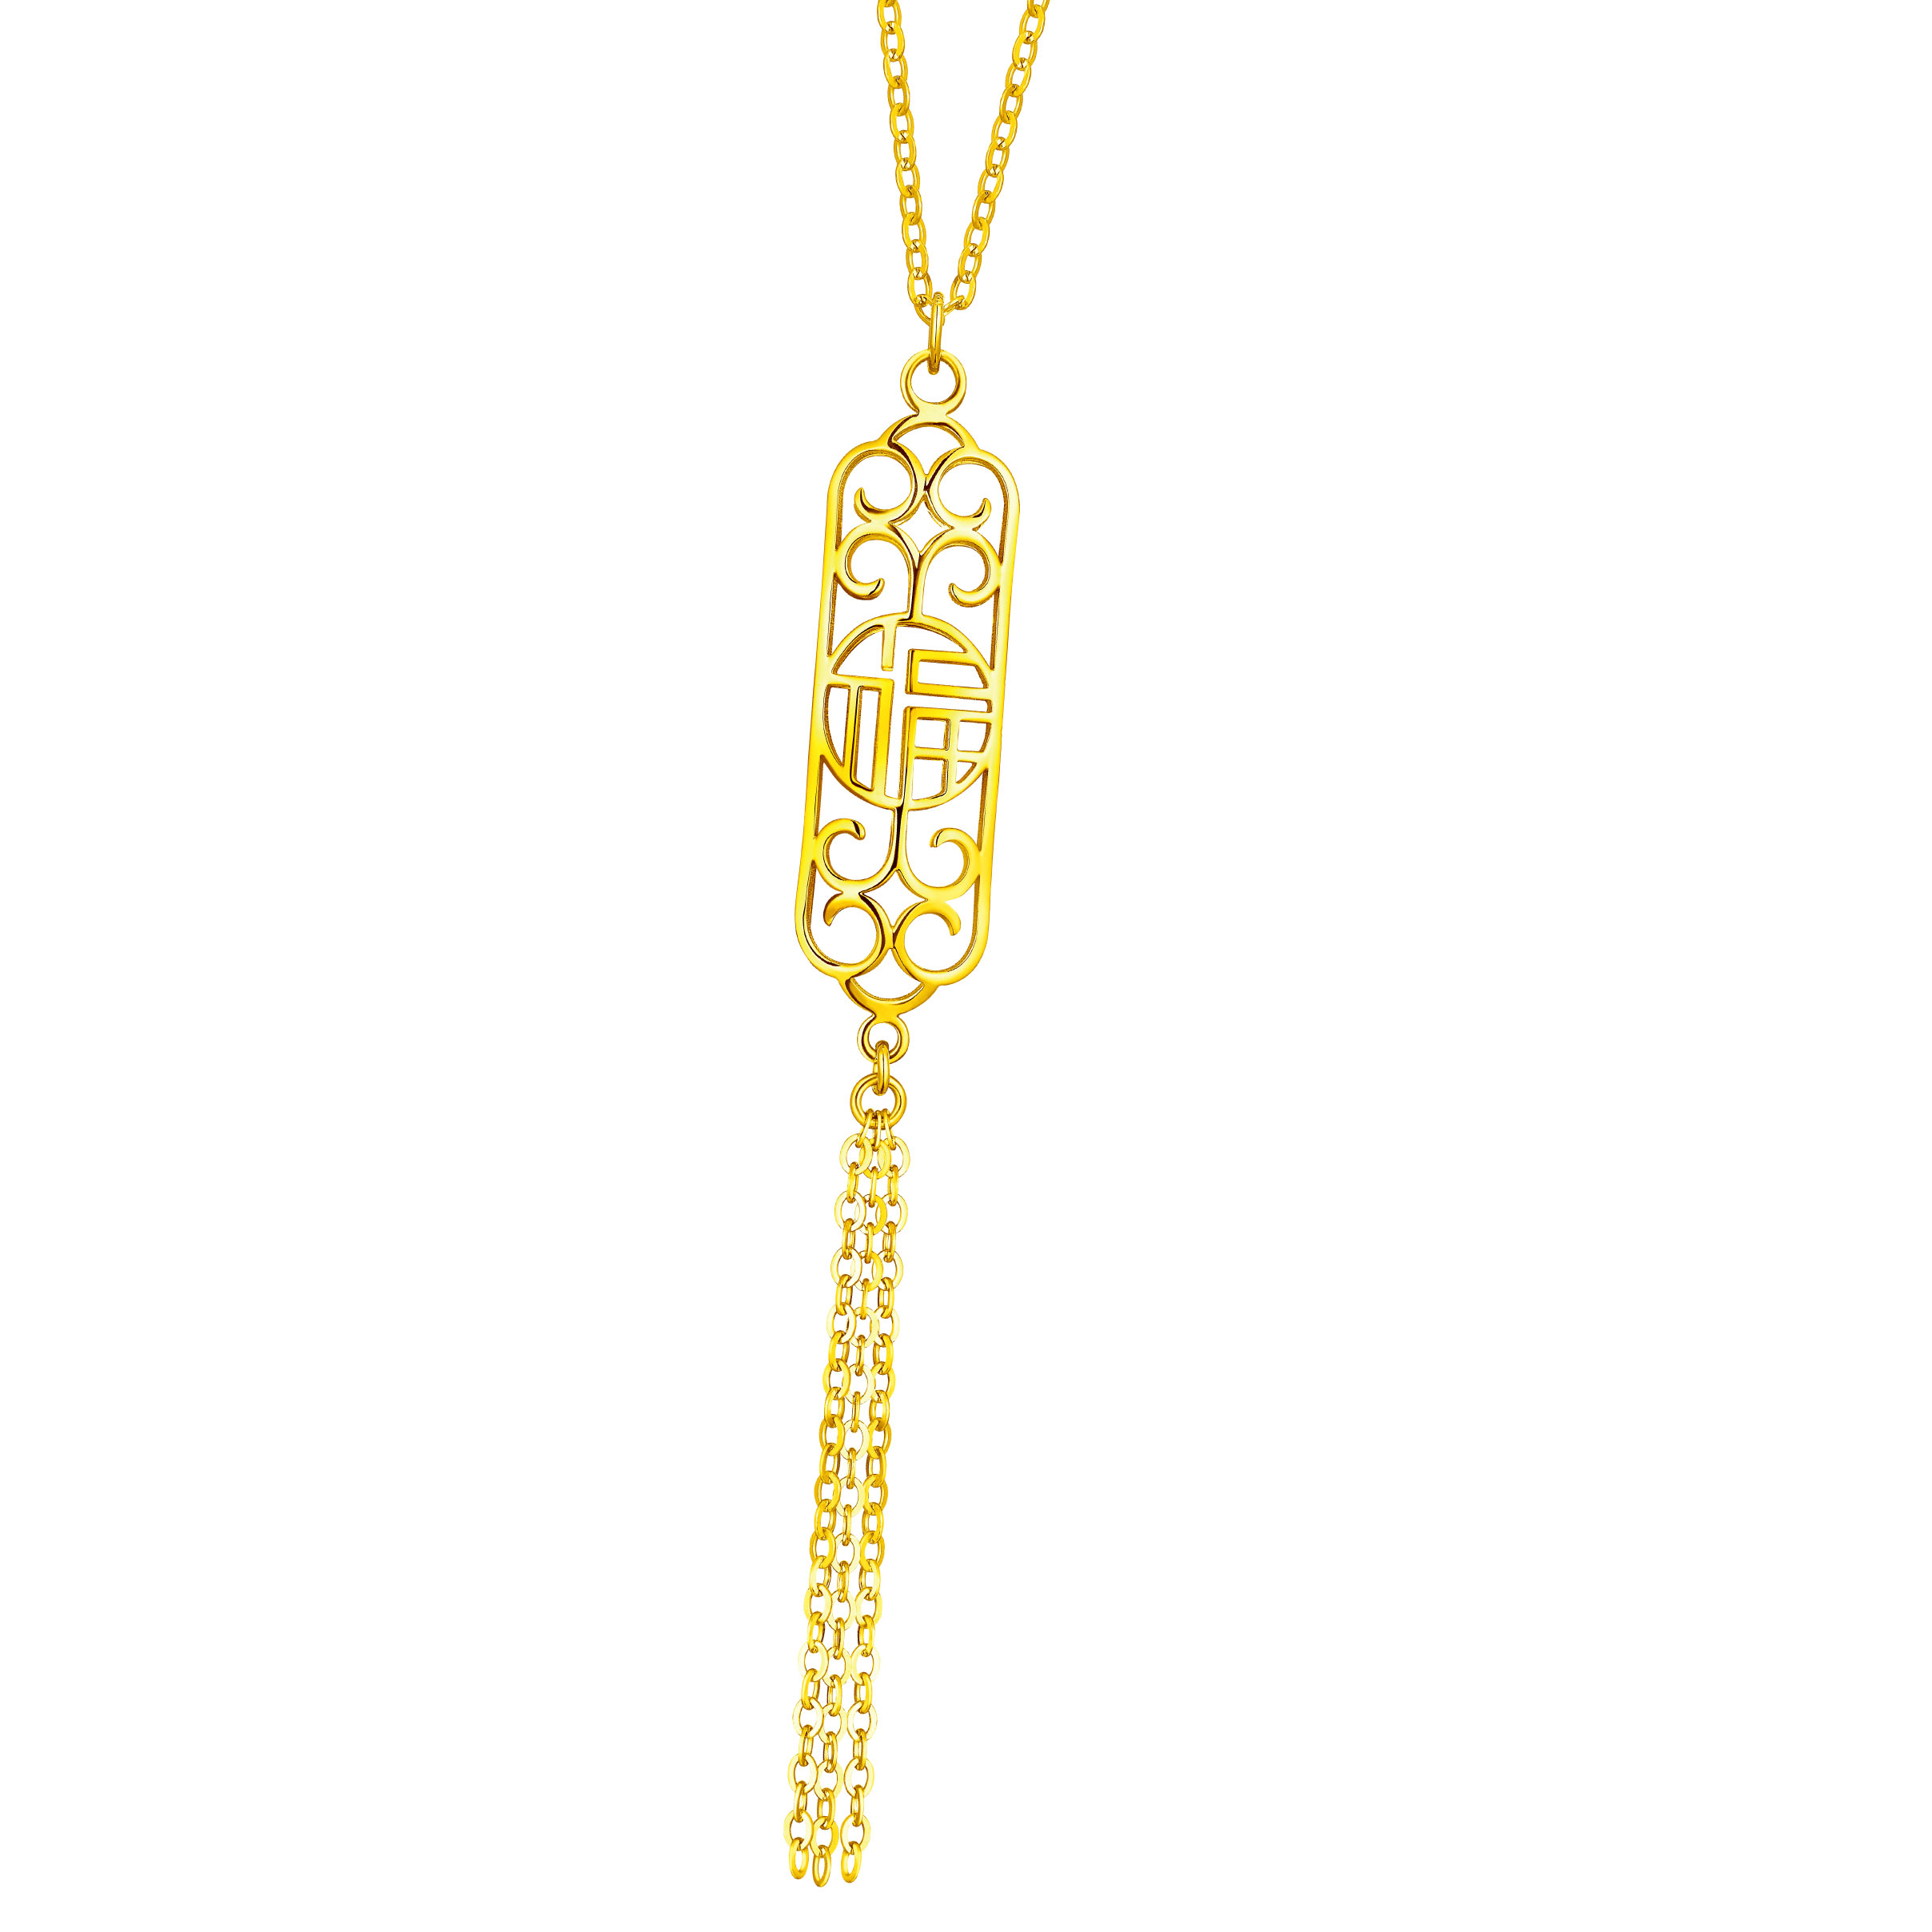 Goldstyle "Bliss" Gold Necklace